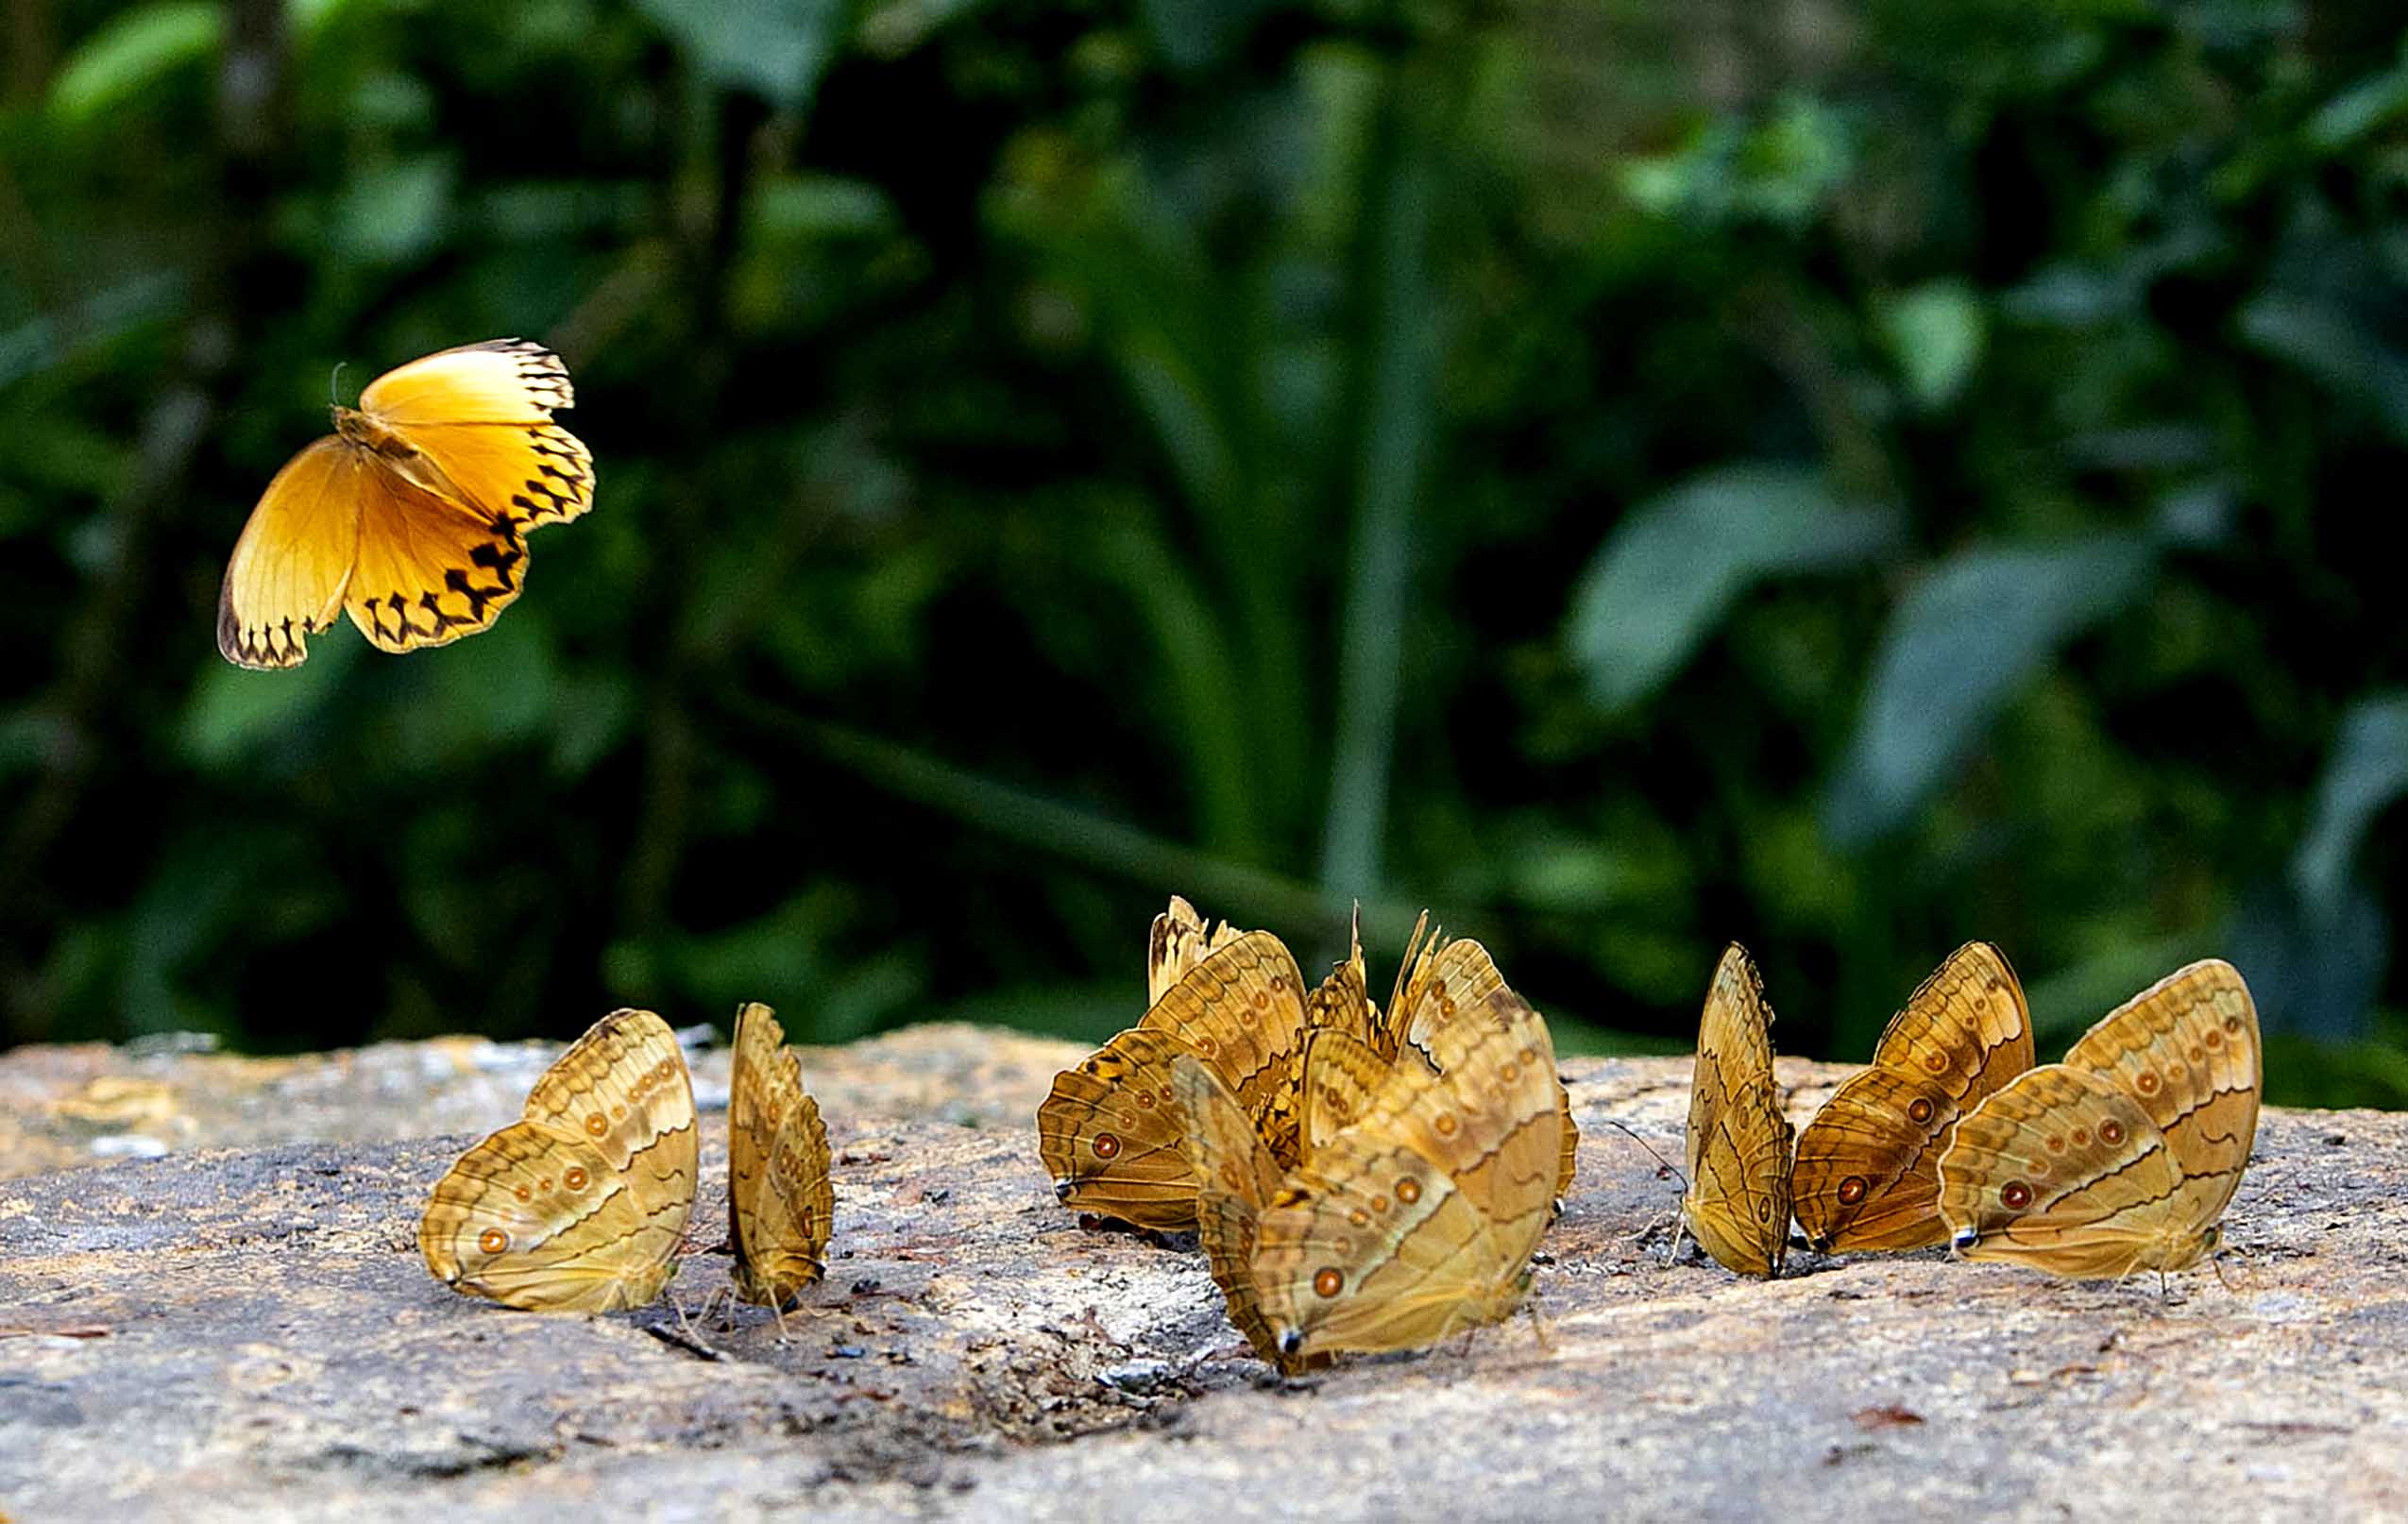  Butterflies are seen in the butterfly valley in Honghe Hani and Yi Autonomous Prefecture, southwest China's Yunnan Province, May 24, 2023. Tens of millions of butterflies have emerged from their chrysalises in the butterfly valley, presenting an astonishing sight.  TO GO WITH 